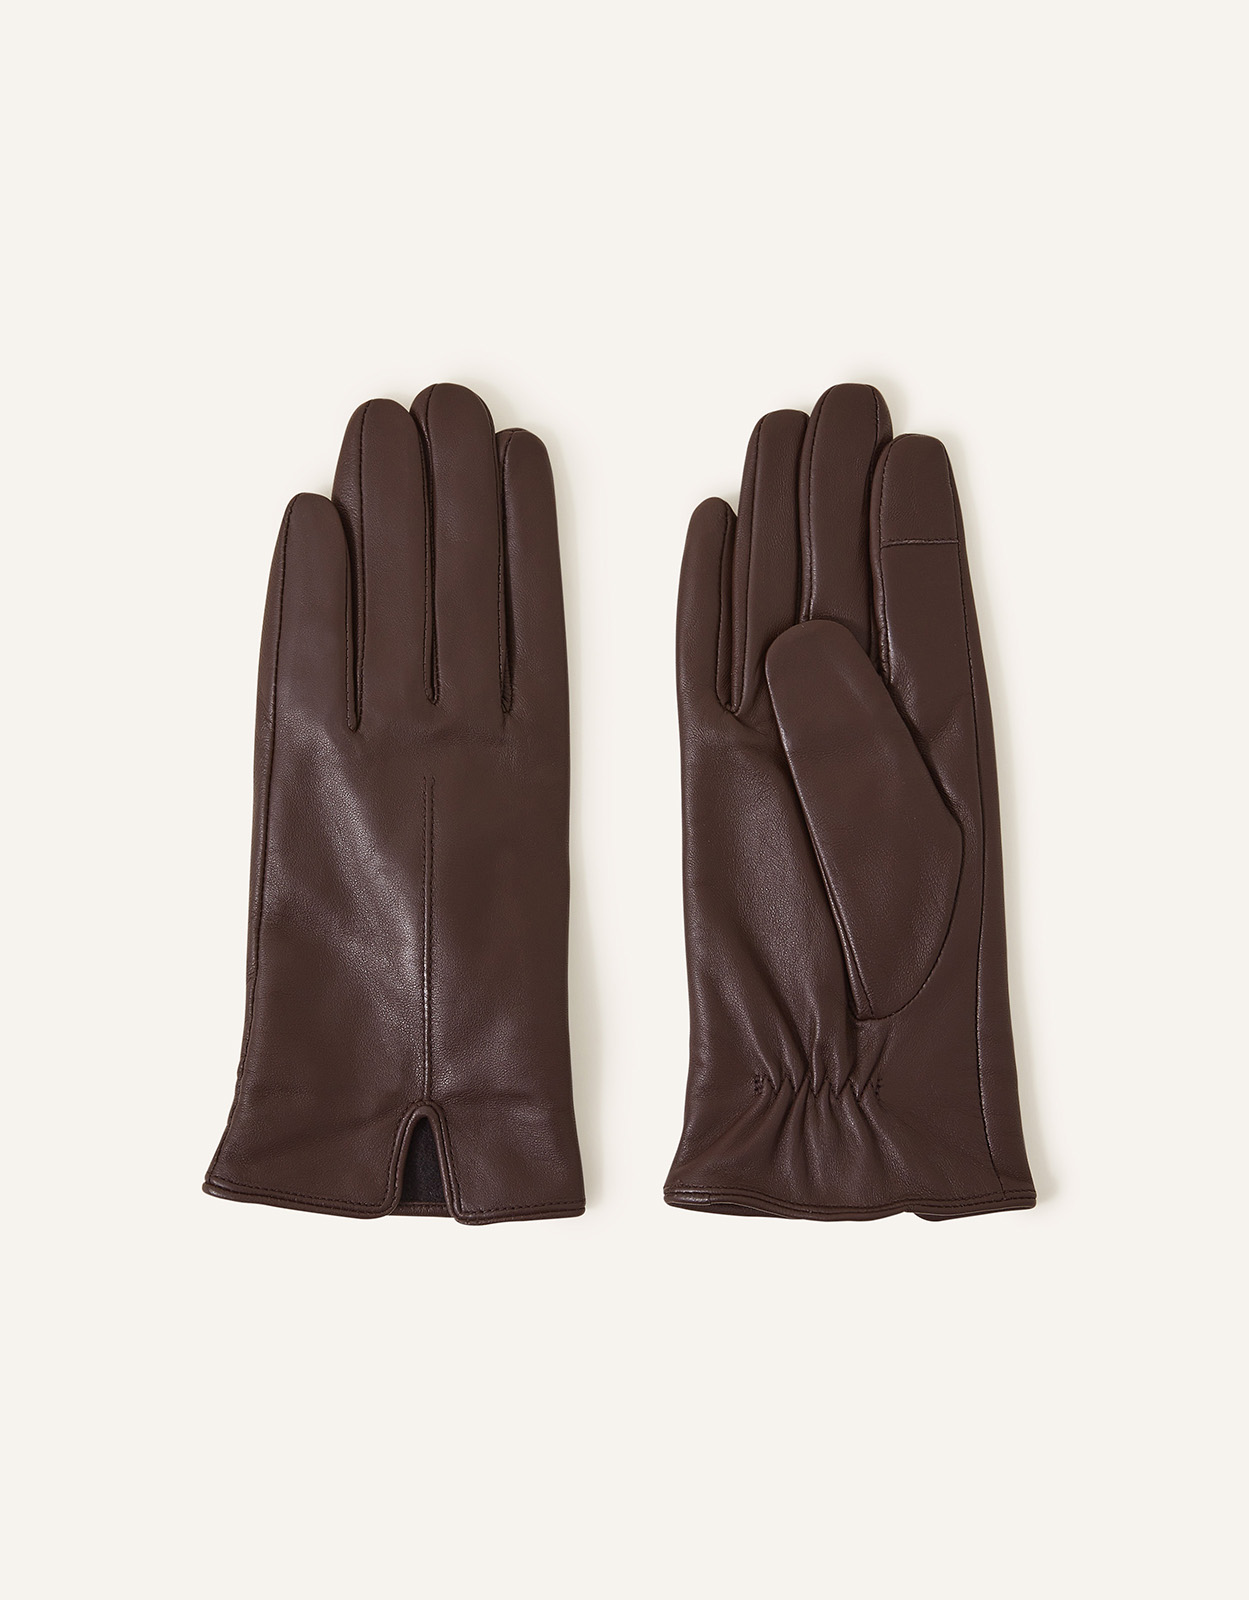 Accessorize Touchscreen Leather Gloves Brown